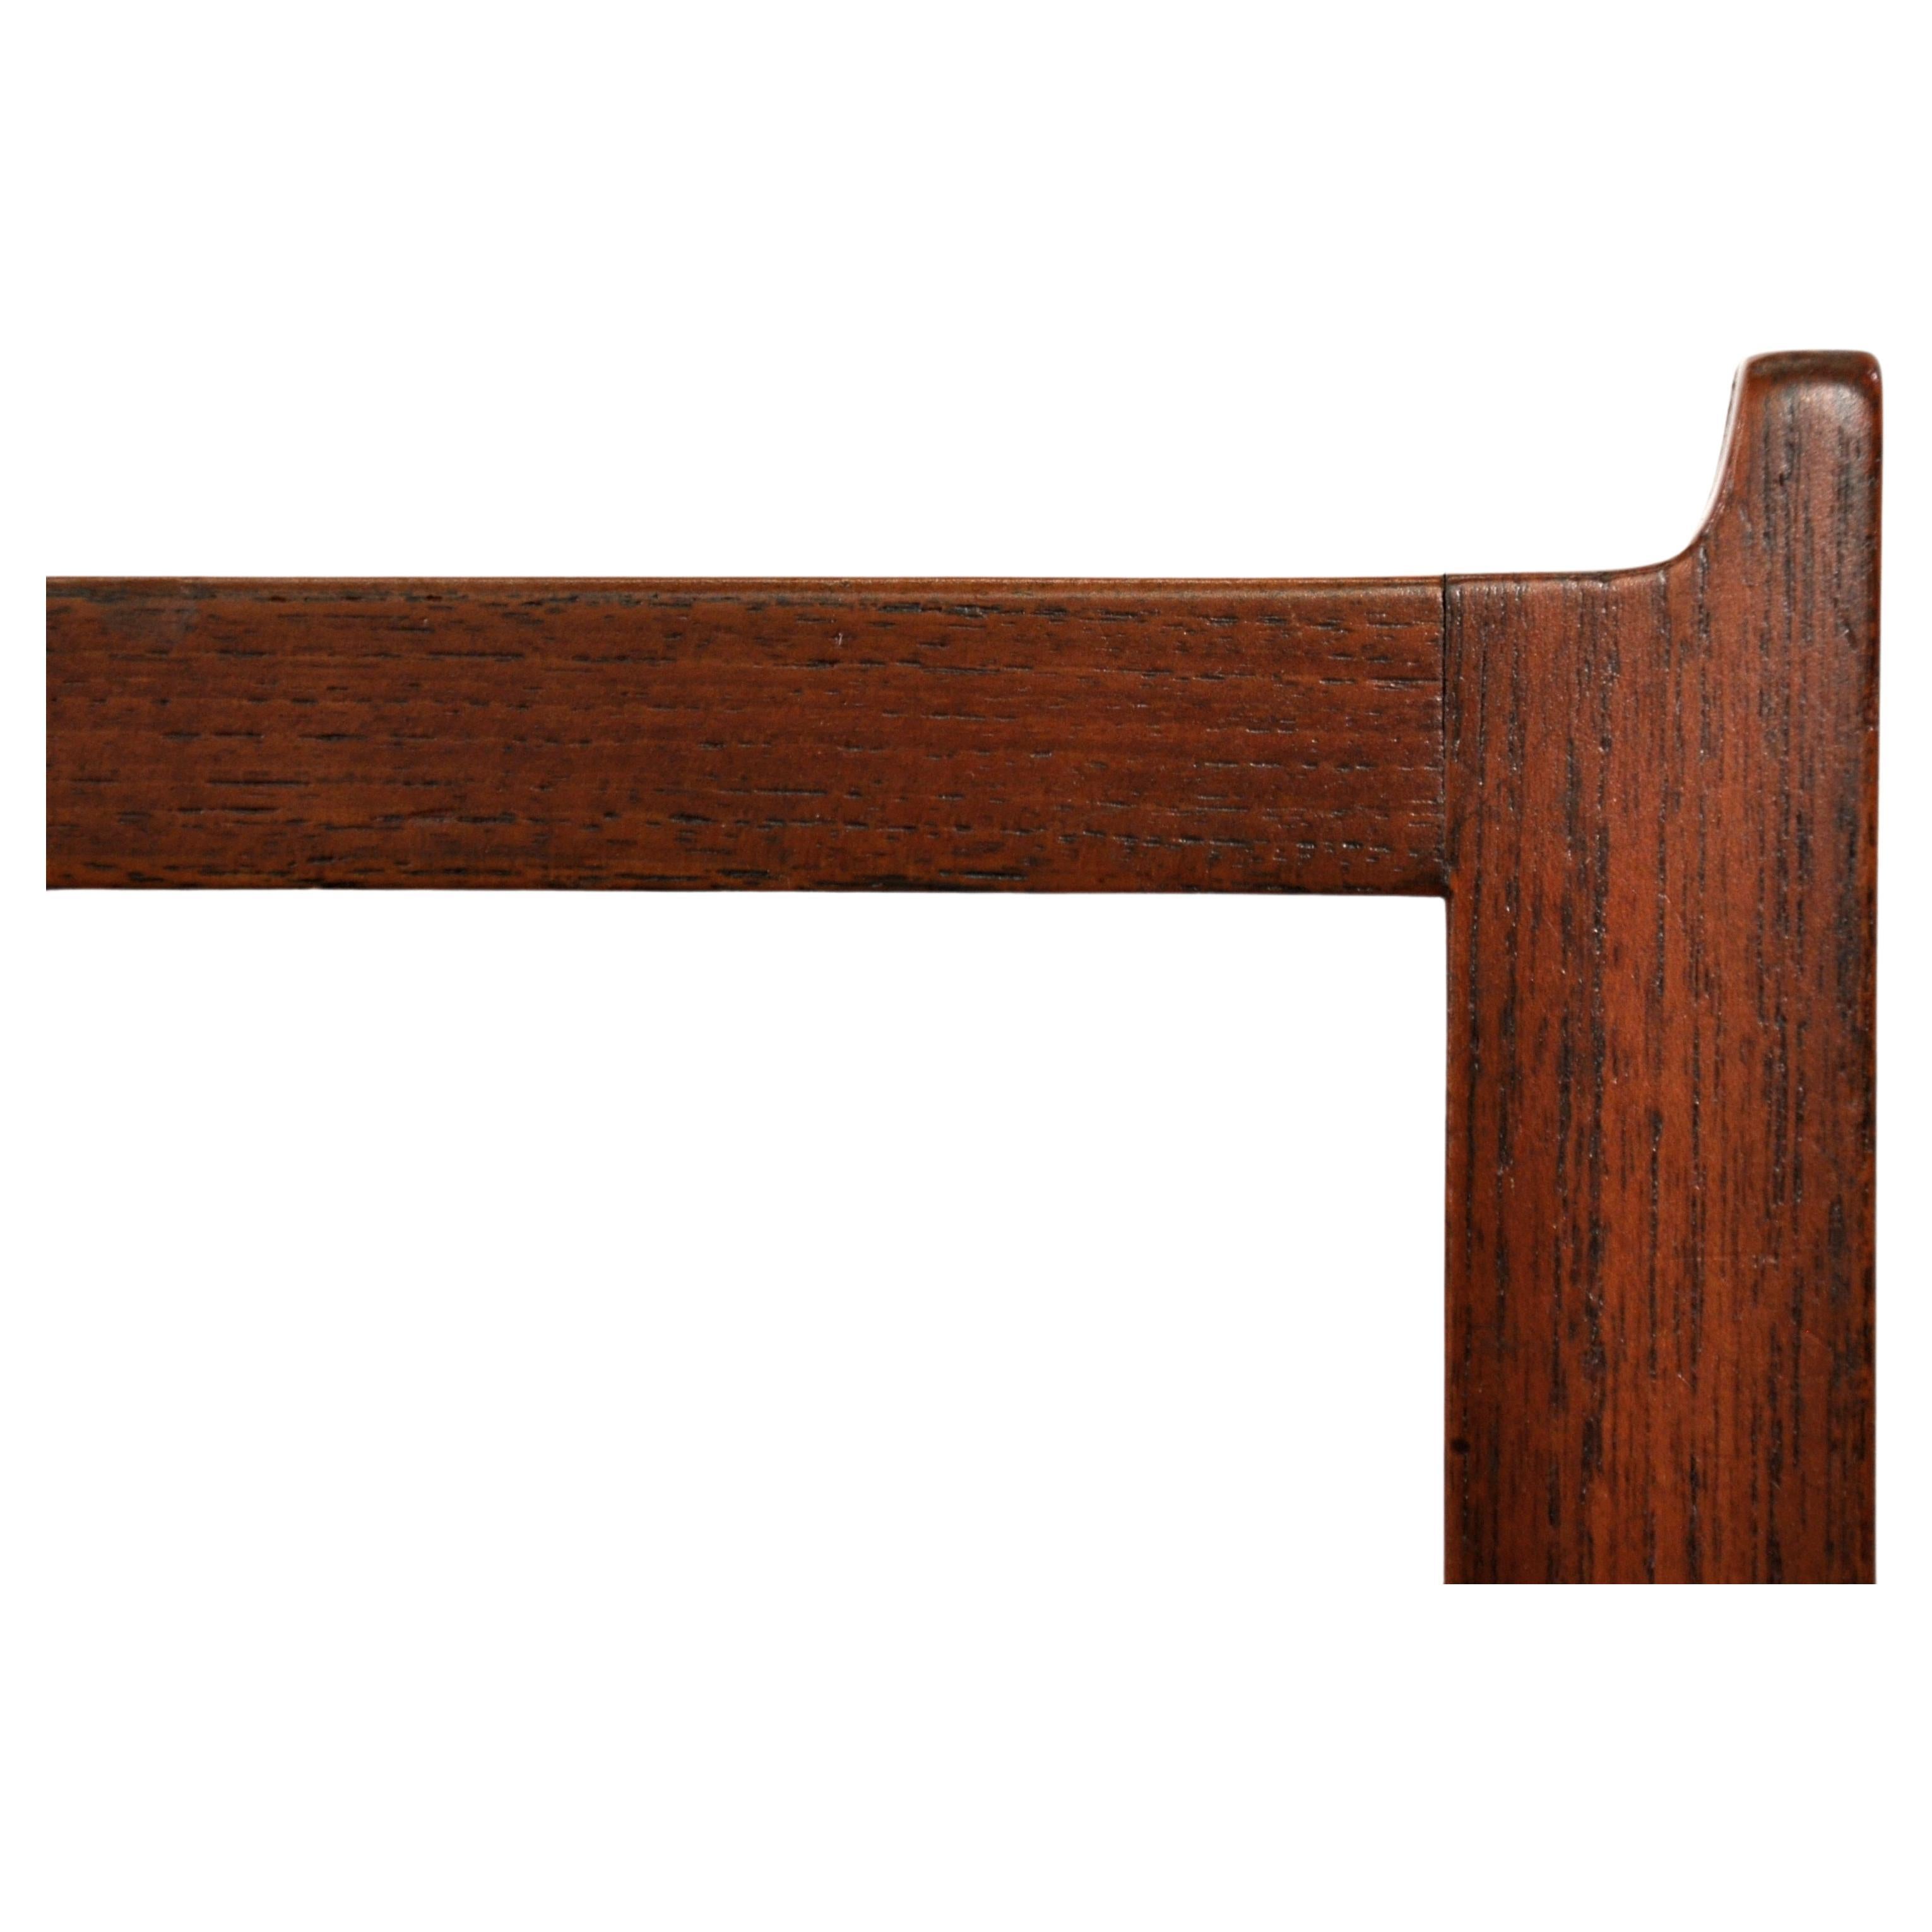 Minimalist teak square end table or small bench with flared side edges, bookmatched wood grain and solid teak legs and spanners. Designed in the 1960s by Brode Blindheim and manufactured in Sykkylven, Norway, the vintage occasional table's classic